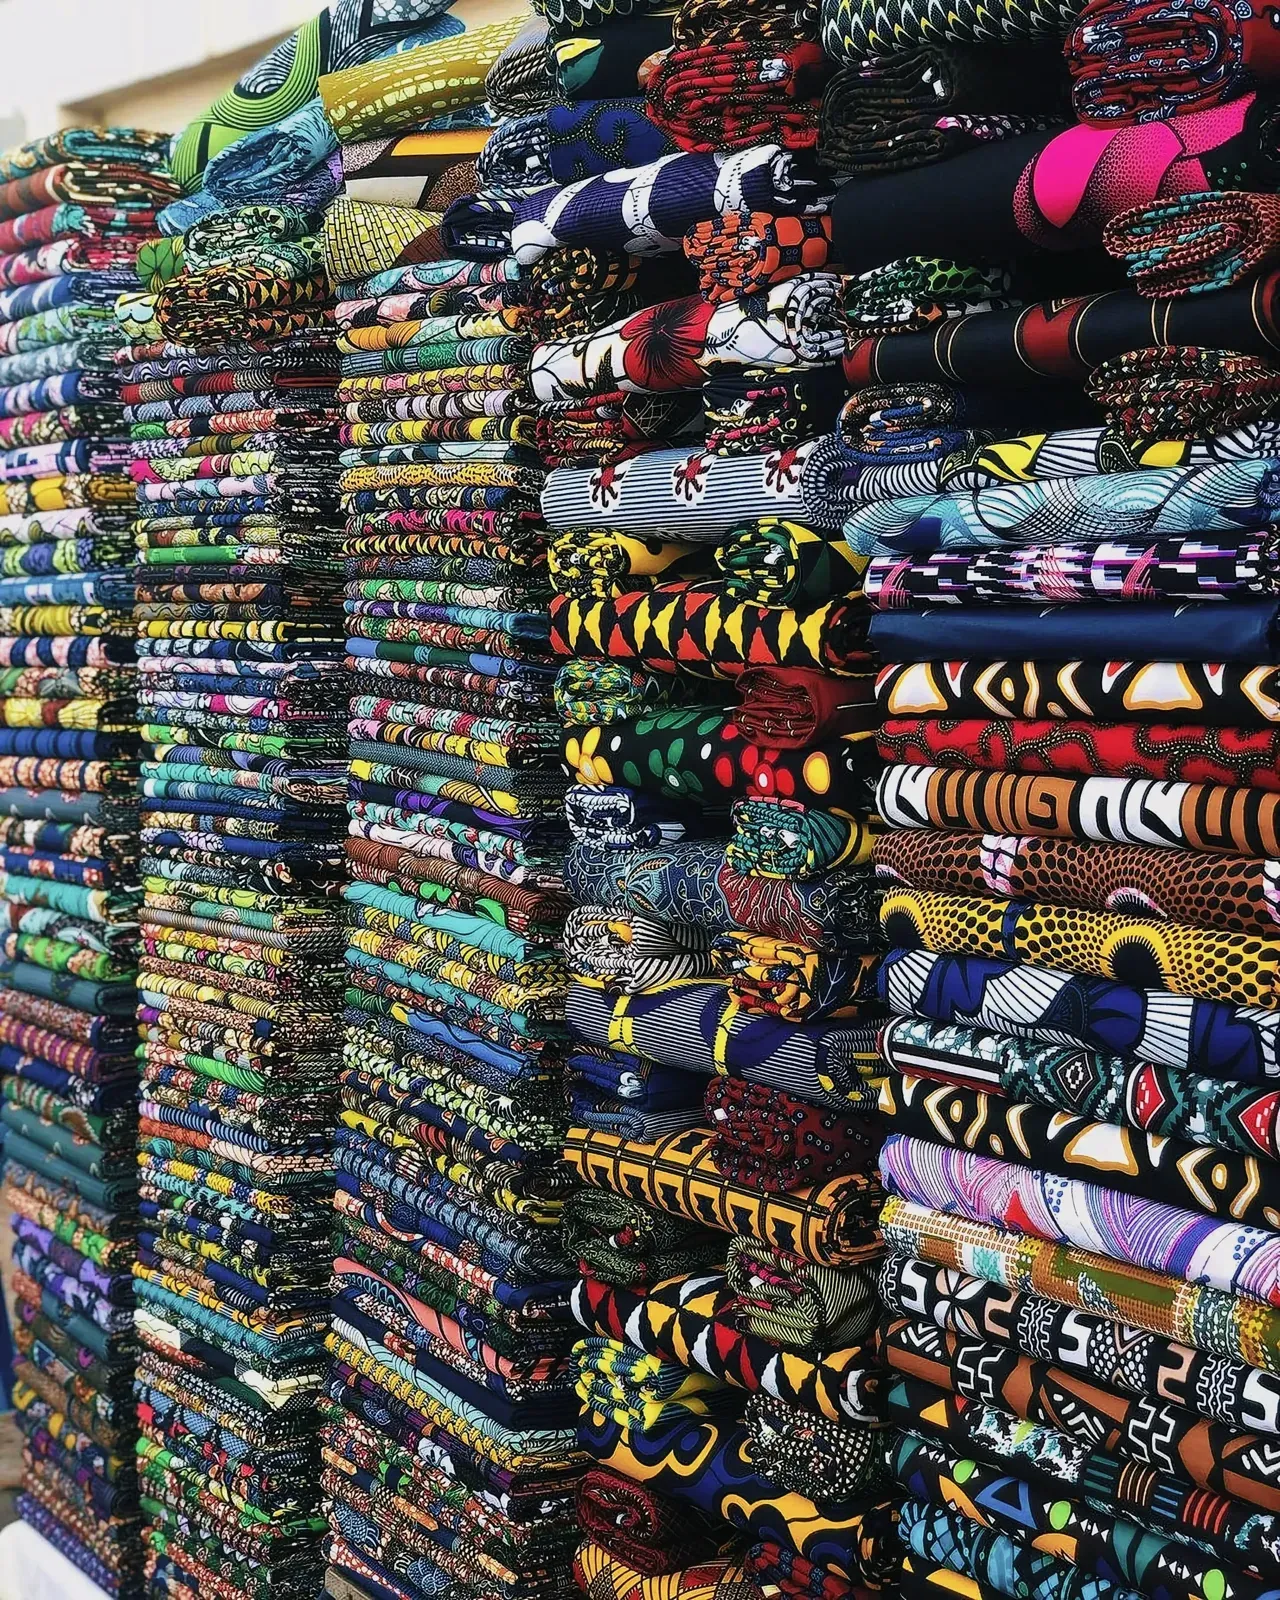 Colorful fabrics stacked neatly in a store in Lomé, Togo.